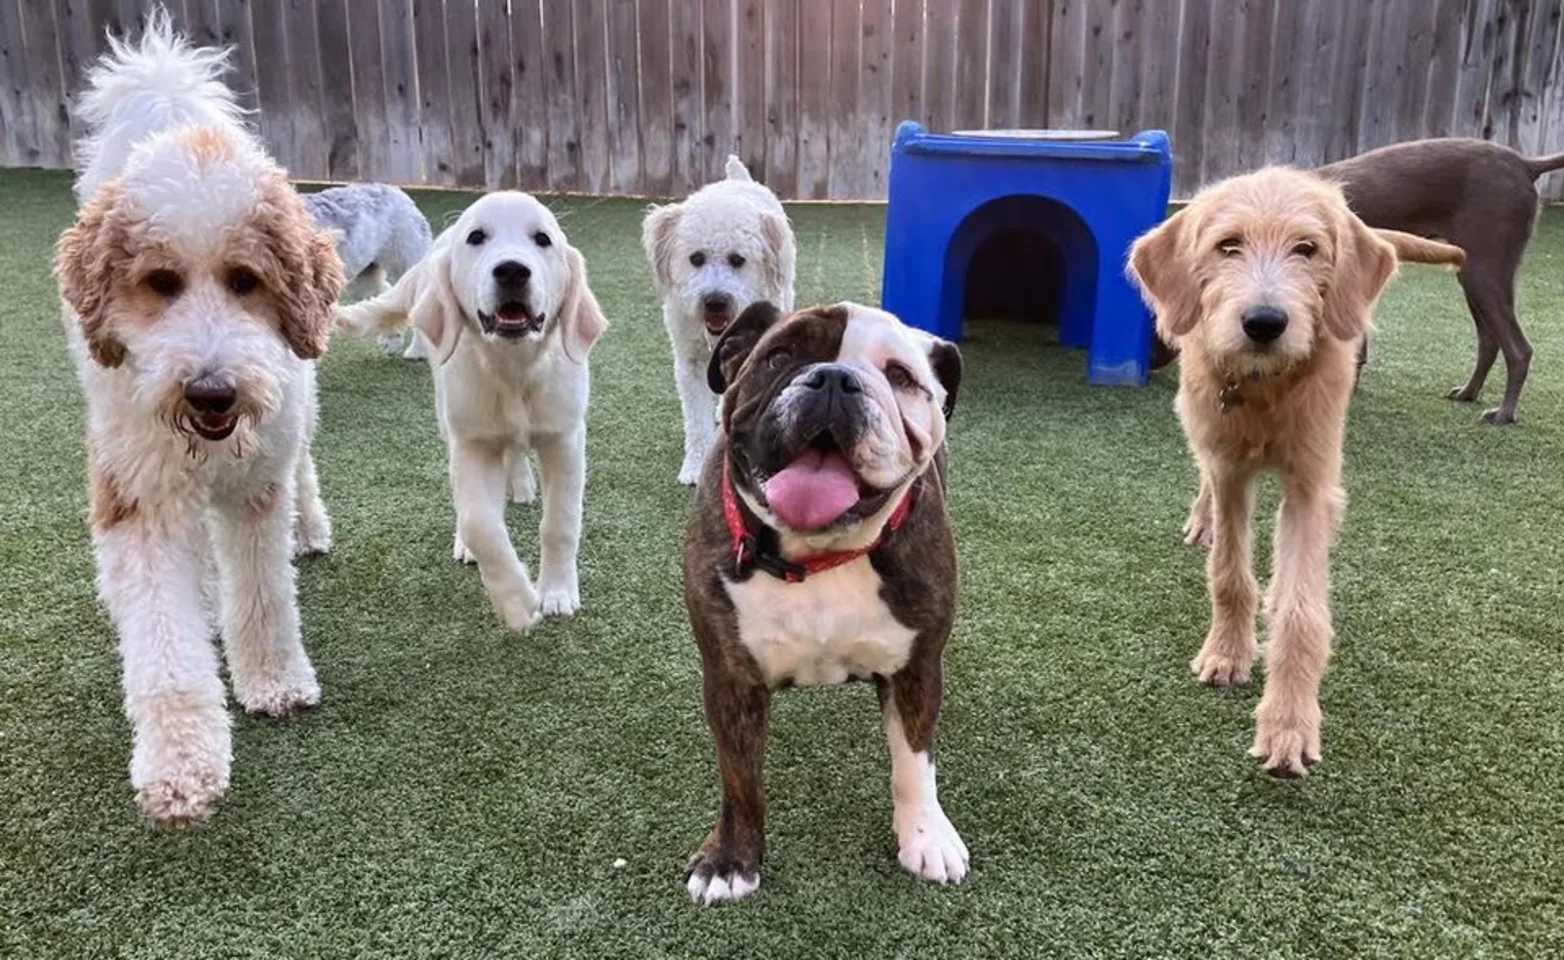 Five large dogs smiling walking towards the camera.